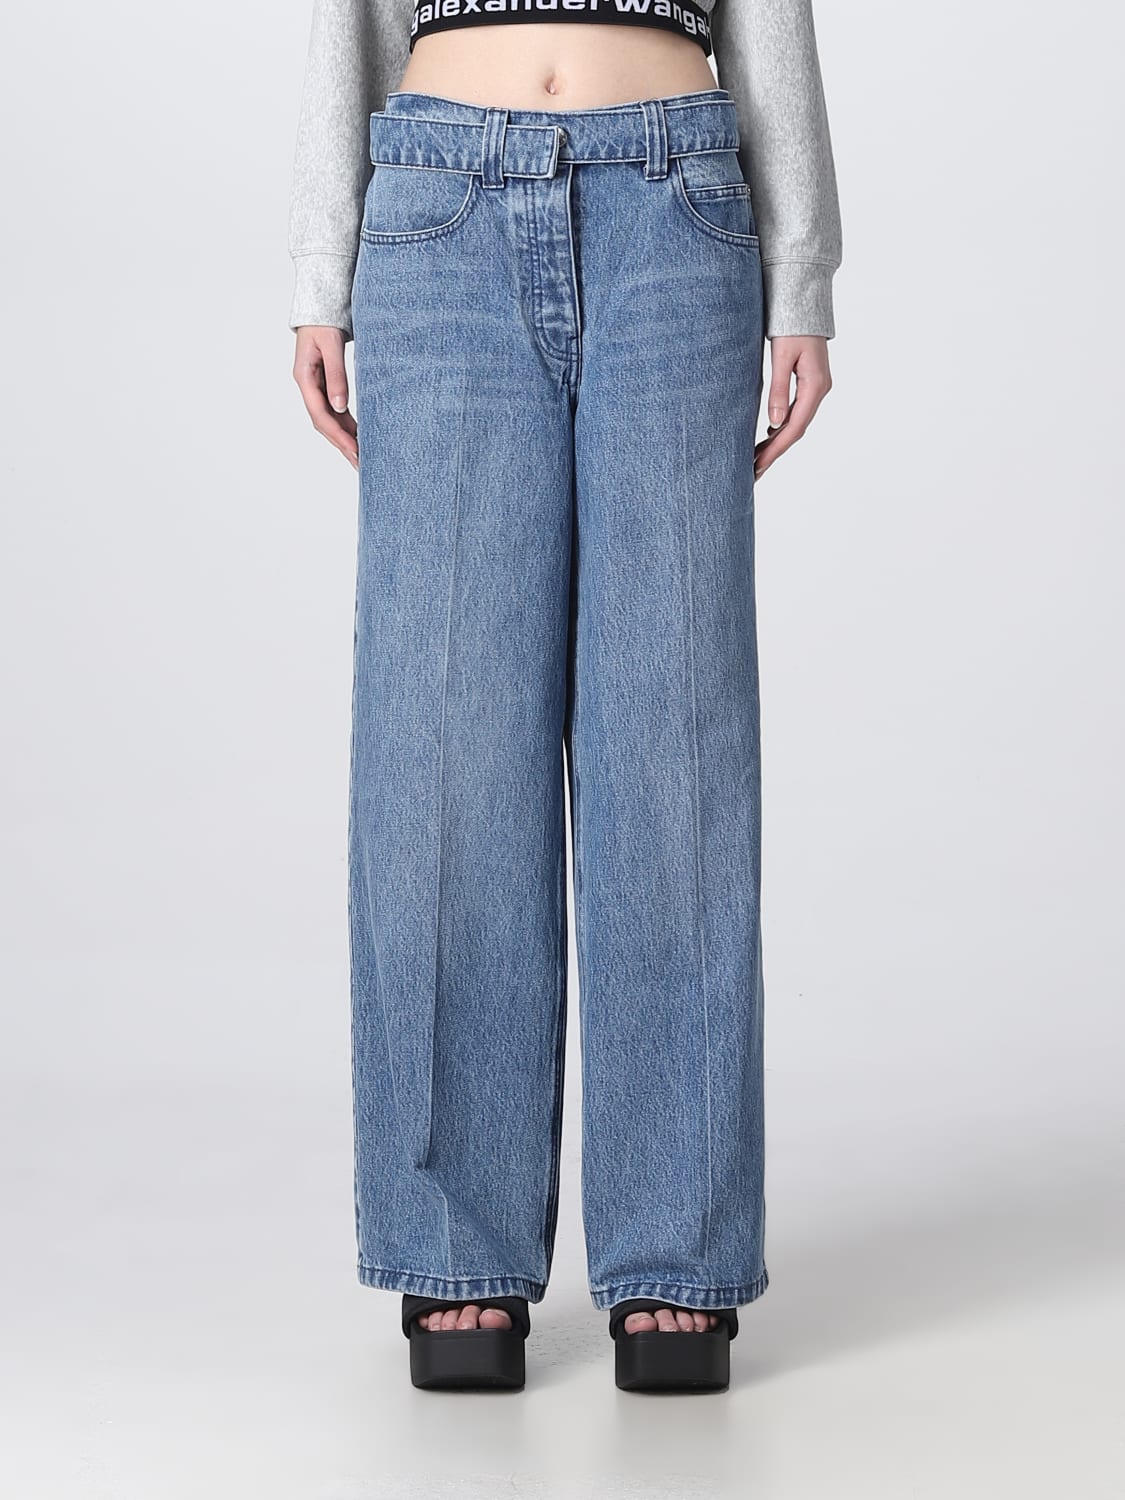 Alexander Outlet: jeans for woman - Blue | Alexander Wang jeans 1WC3224490 at GIGLIO.COM